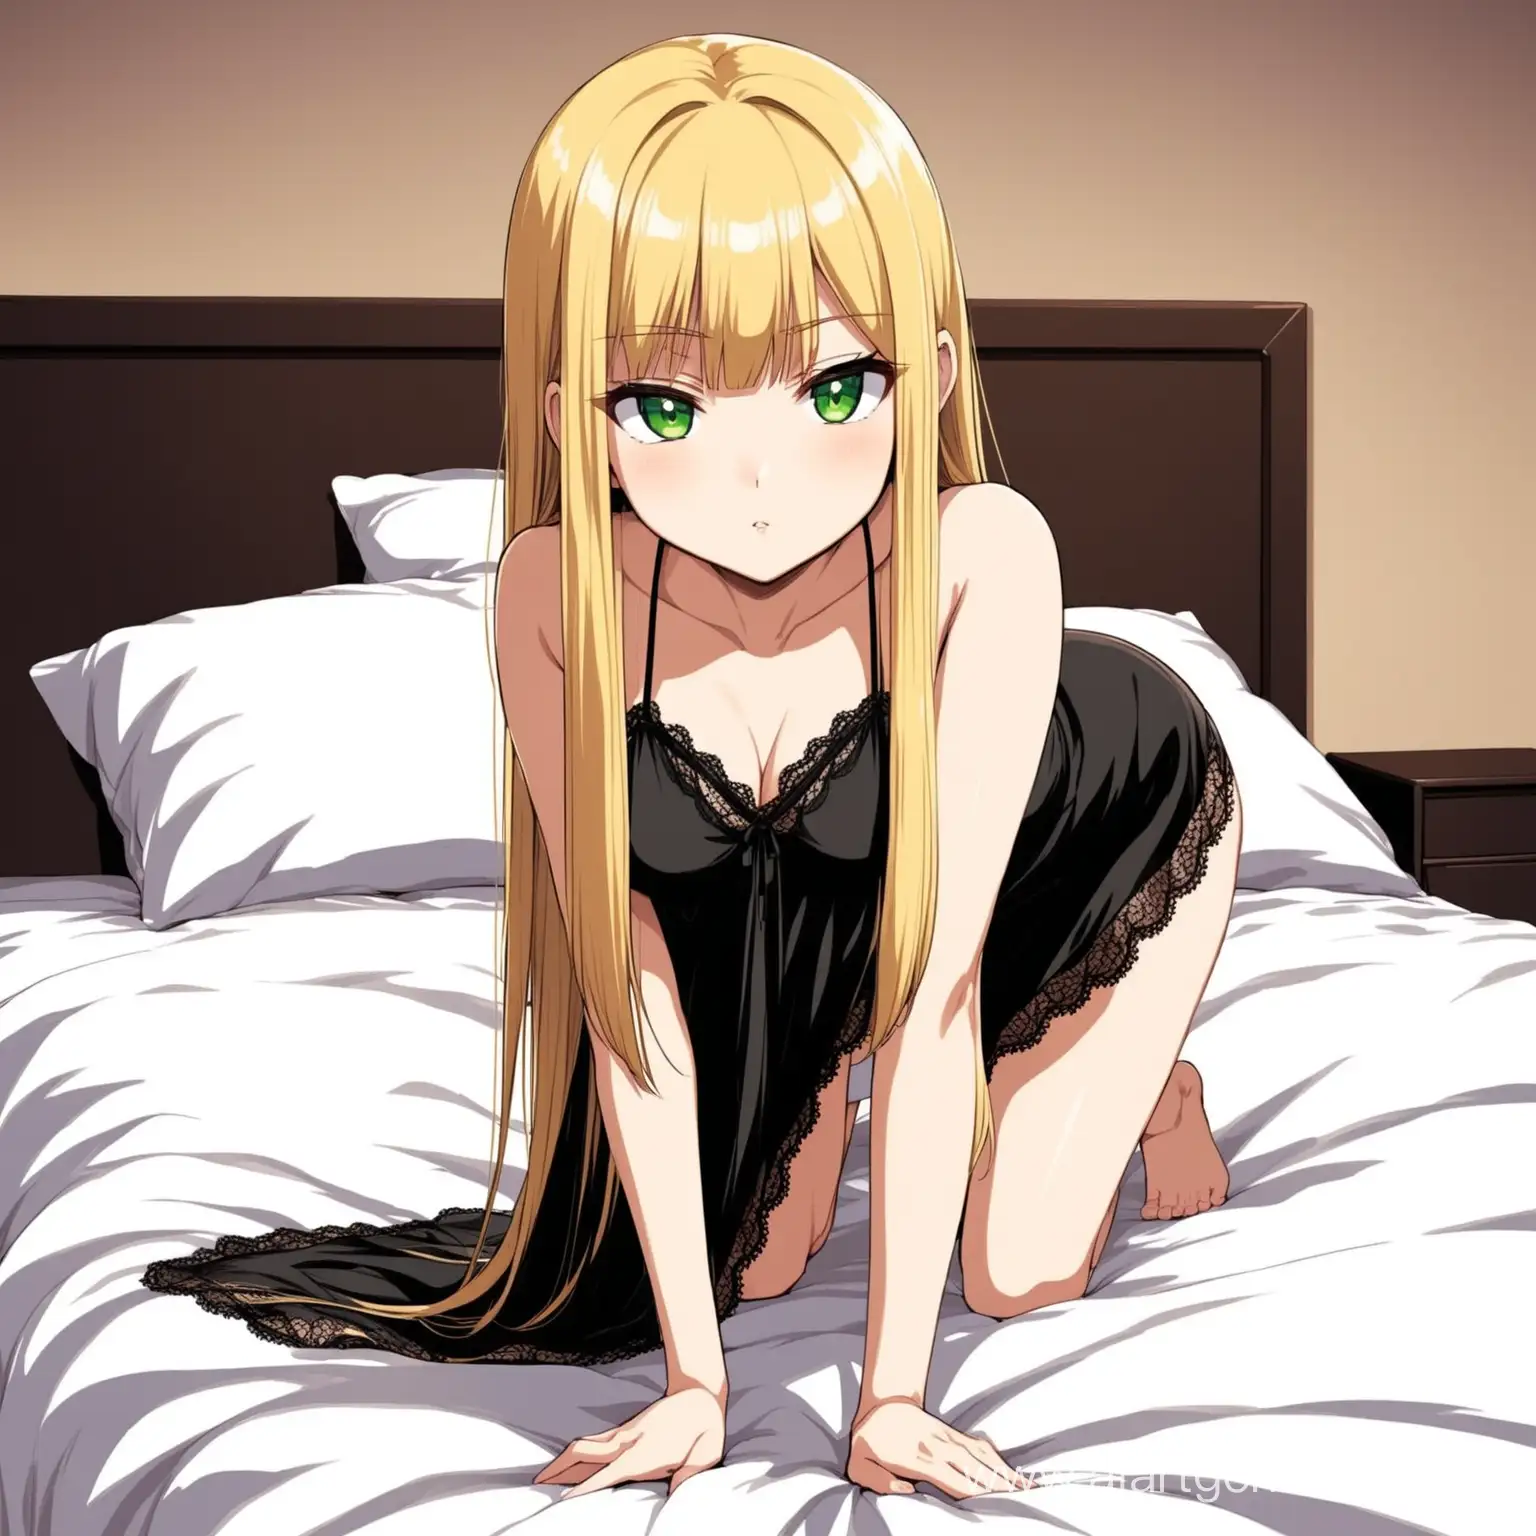 Seductive-Blonde-Anime-Girl-in-Black-Nightgown-Poses-on-Bed